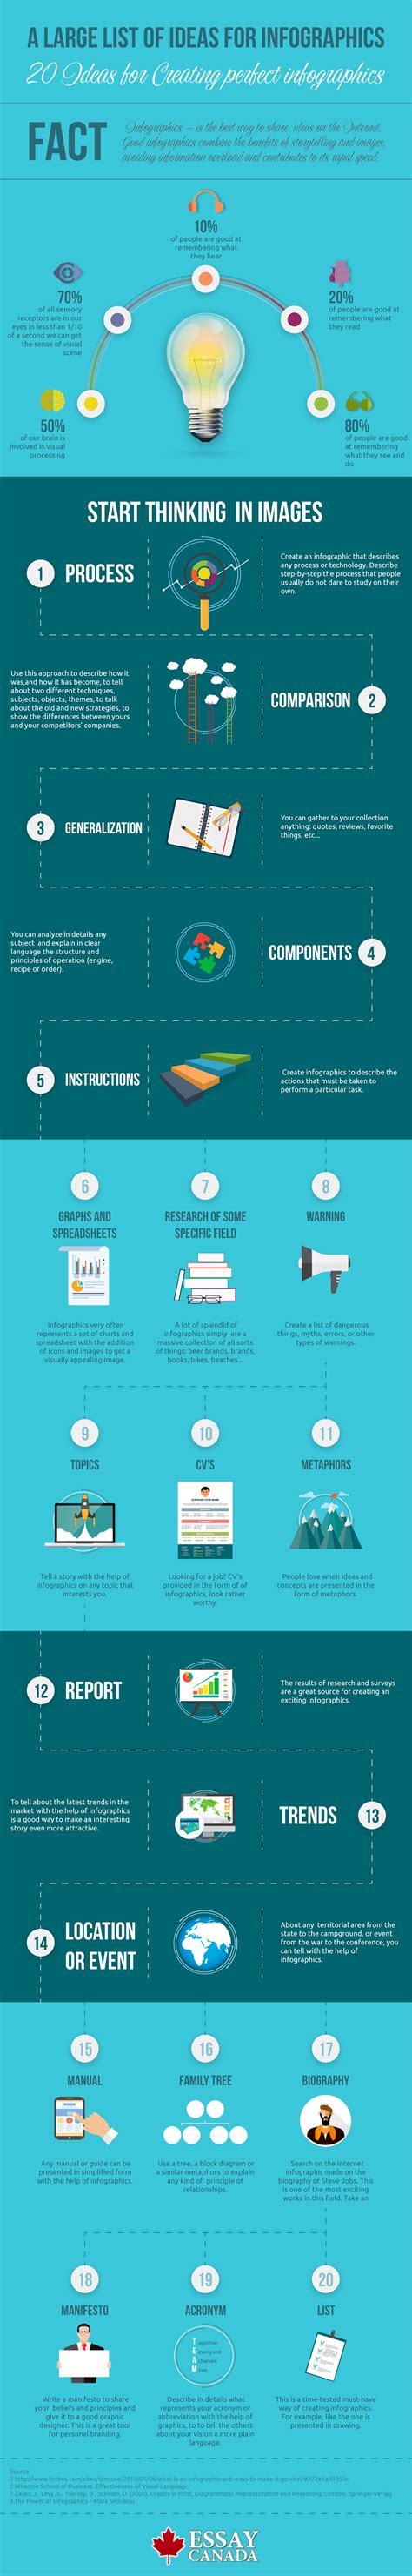 20 Ideas for Creating Perfect Infographics Infographic - e-Learning Infographics